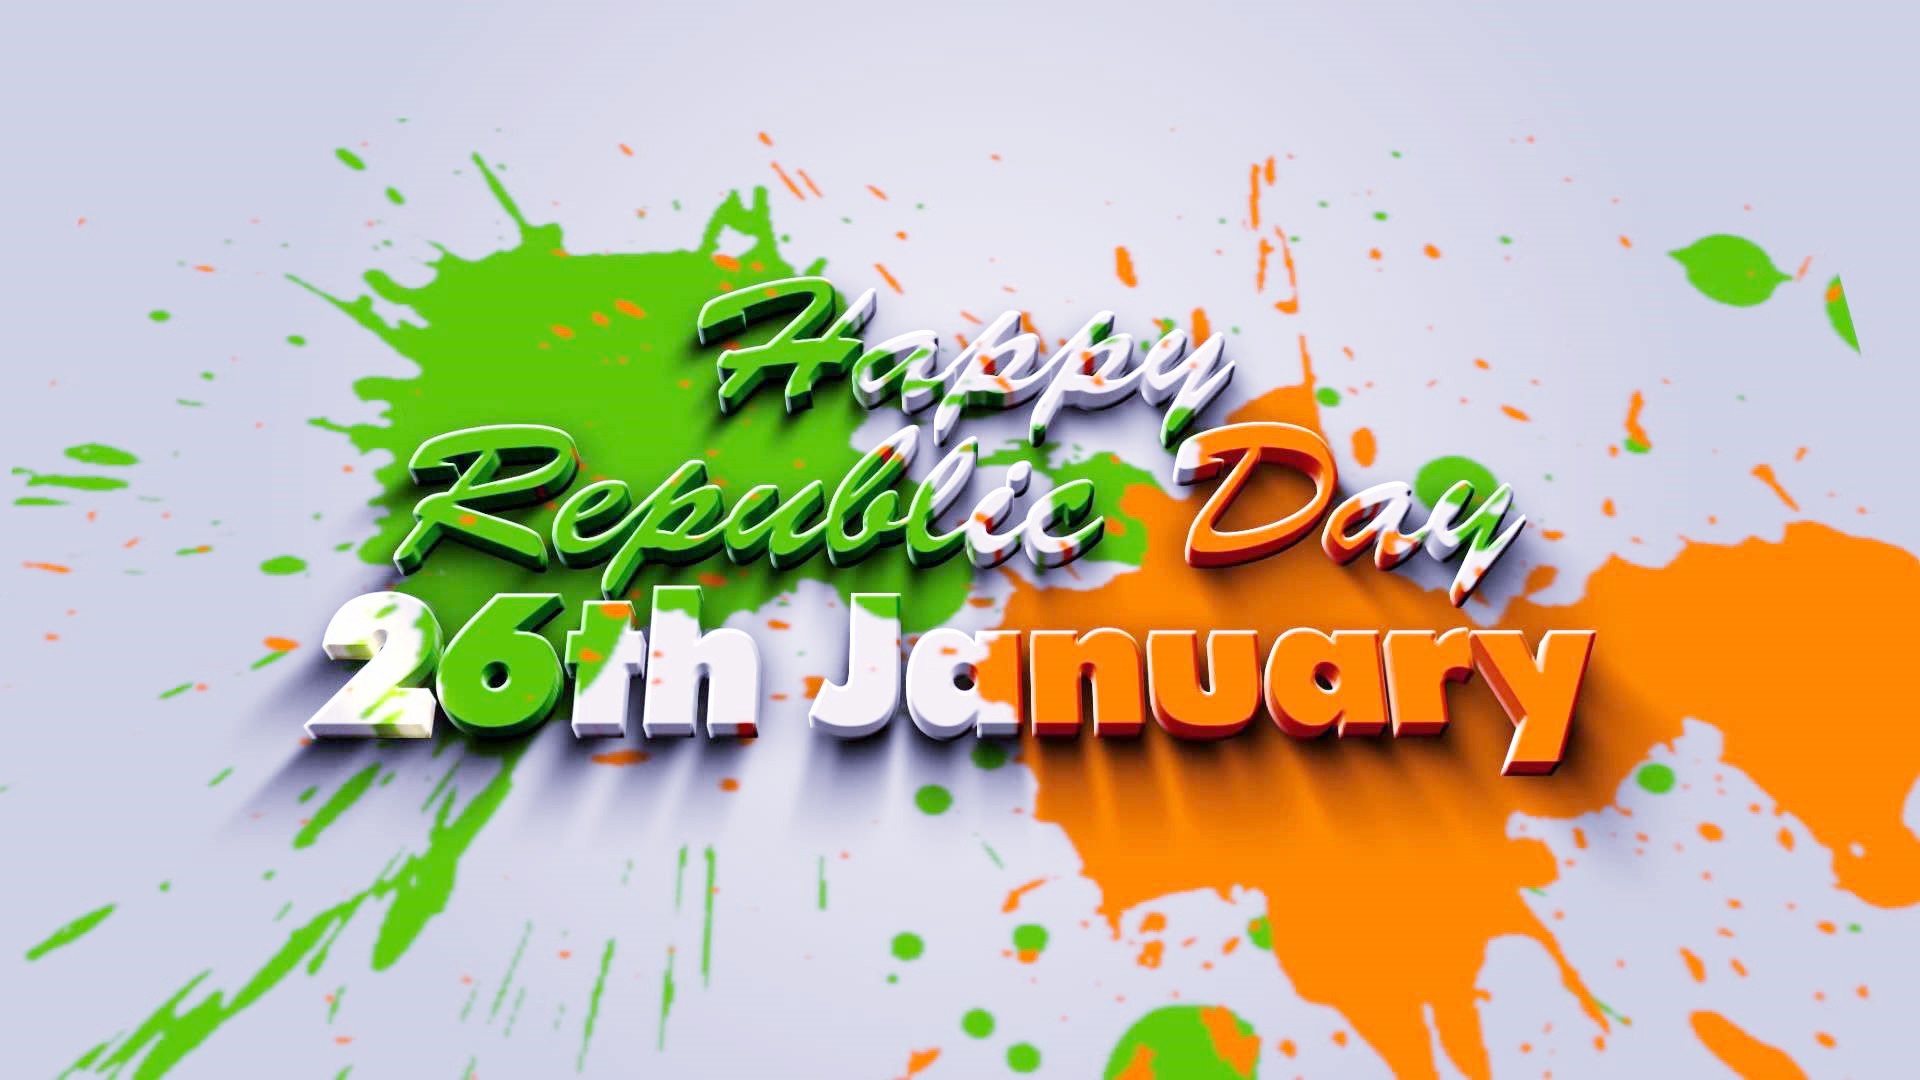 Republic Day HD 4k Wallpapers Images Free Download